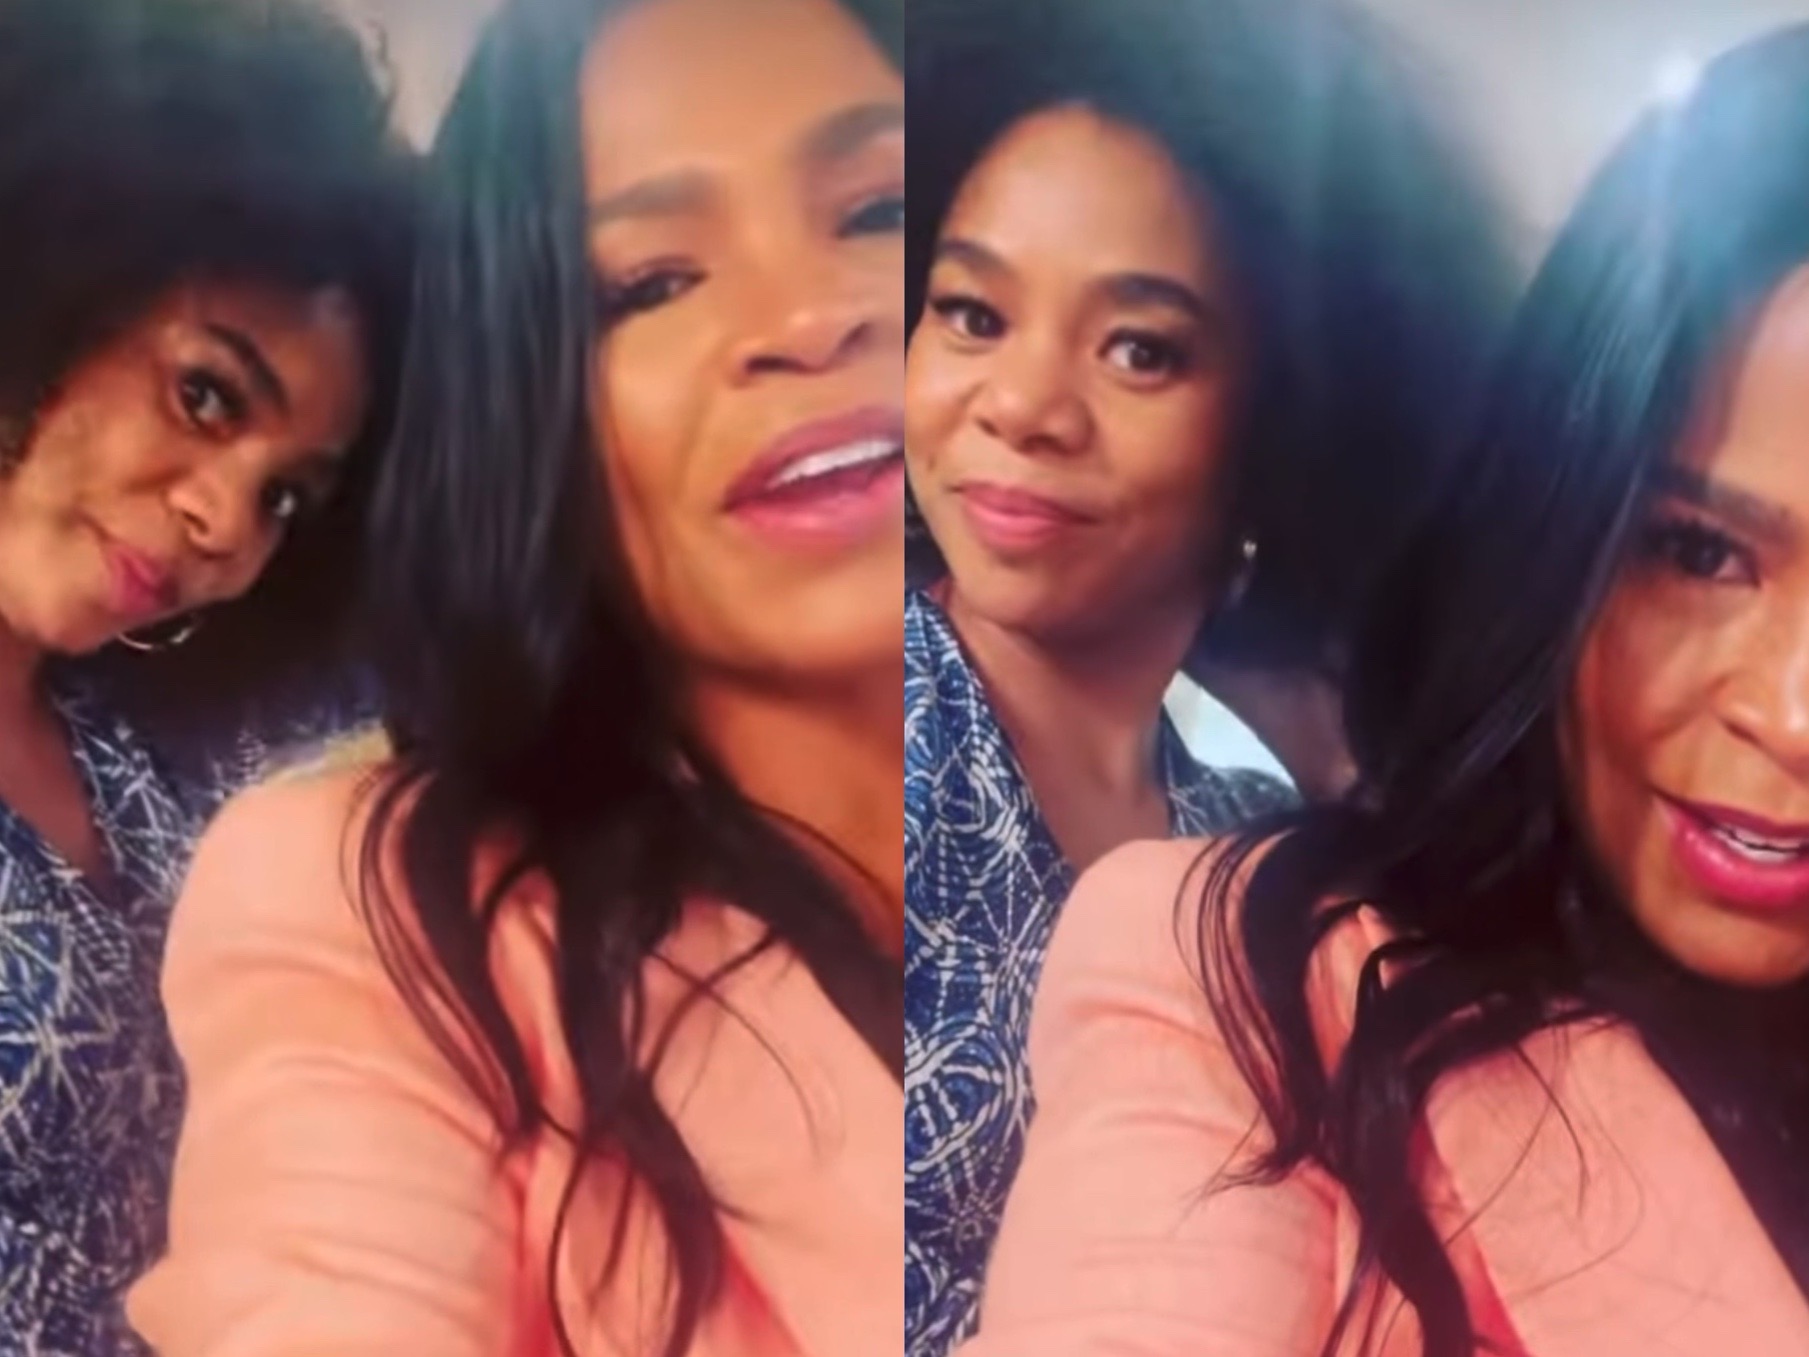 'She Lies! This Is a Wig': Regina Hall and Nia Long Leave Fans in Stitches After Joking About Their Hair Issues on Set of 'The Best Man: The Final Chapters'